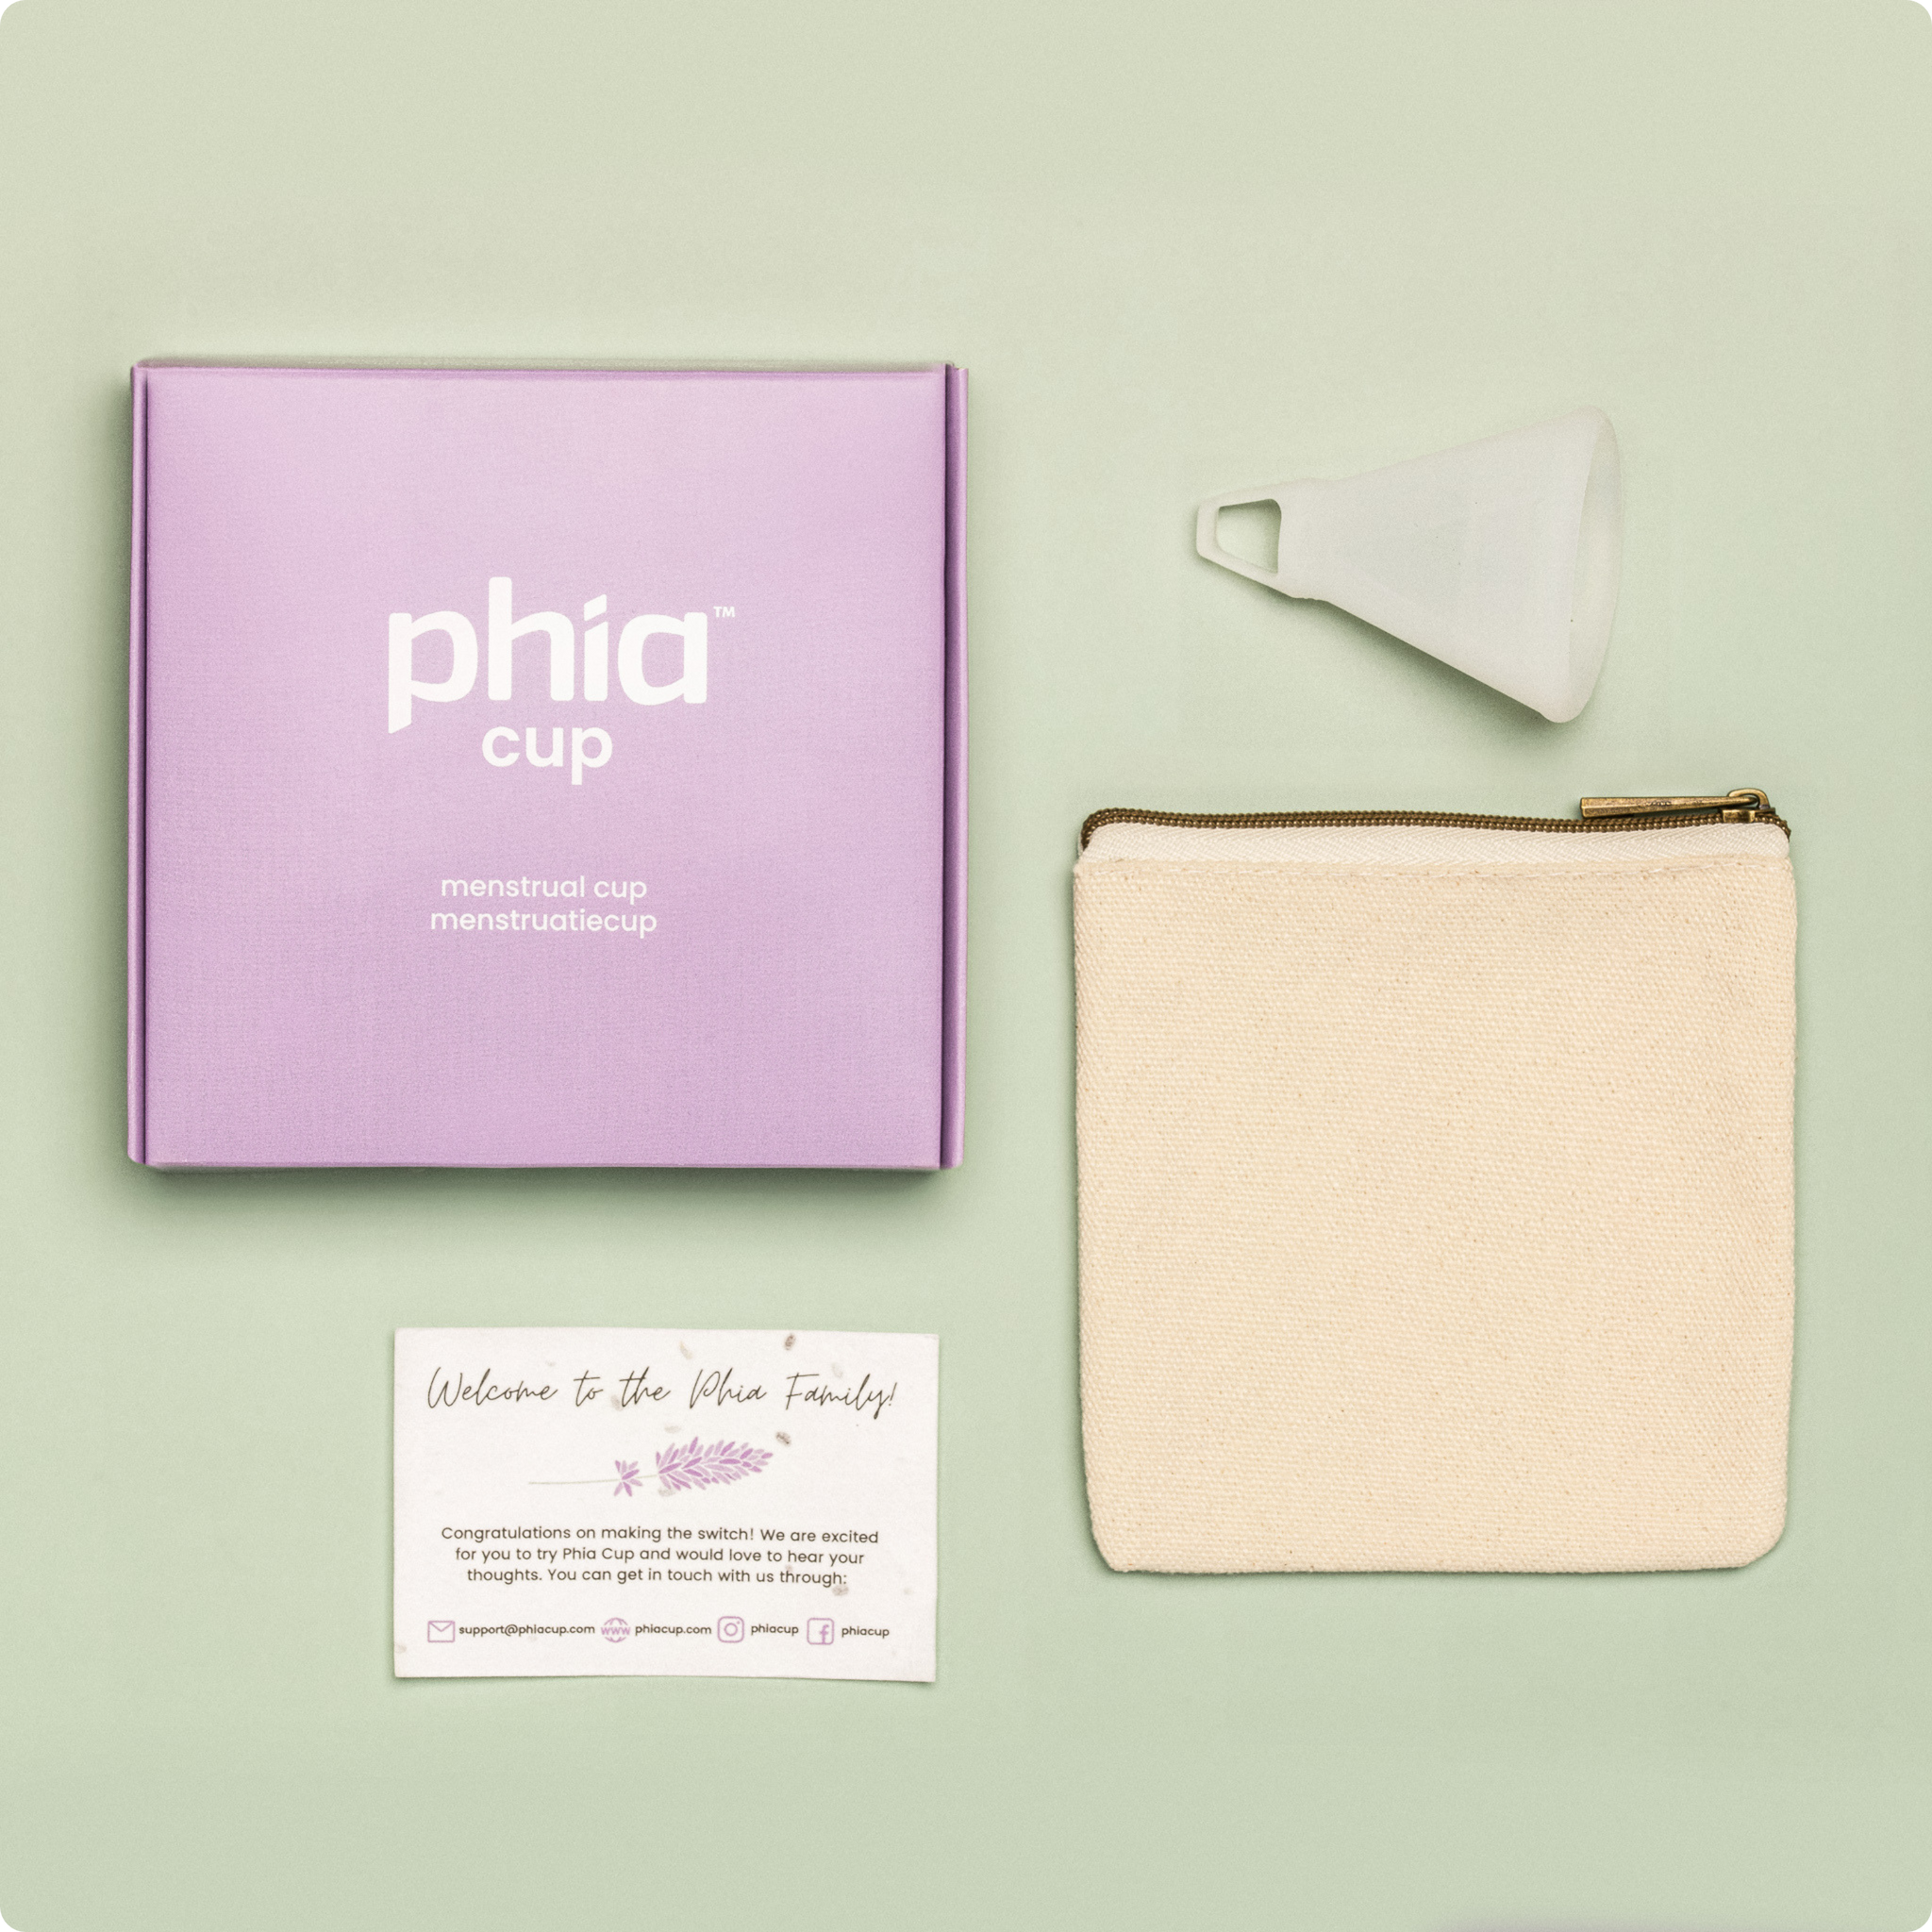 Phia Cup Package Contents including the packaging, Phia Menstrual Cup, Storage Pouch, and welcome card